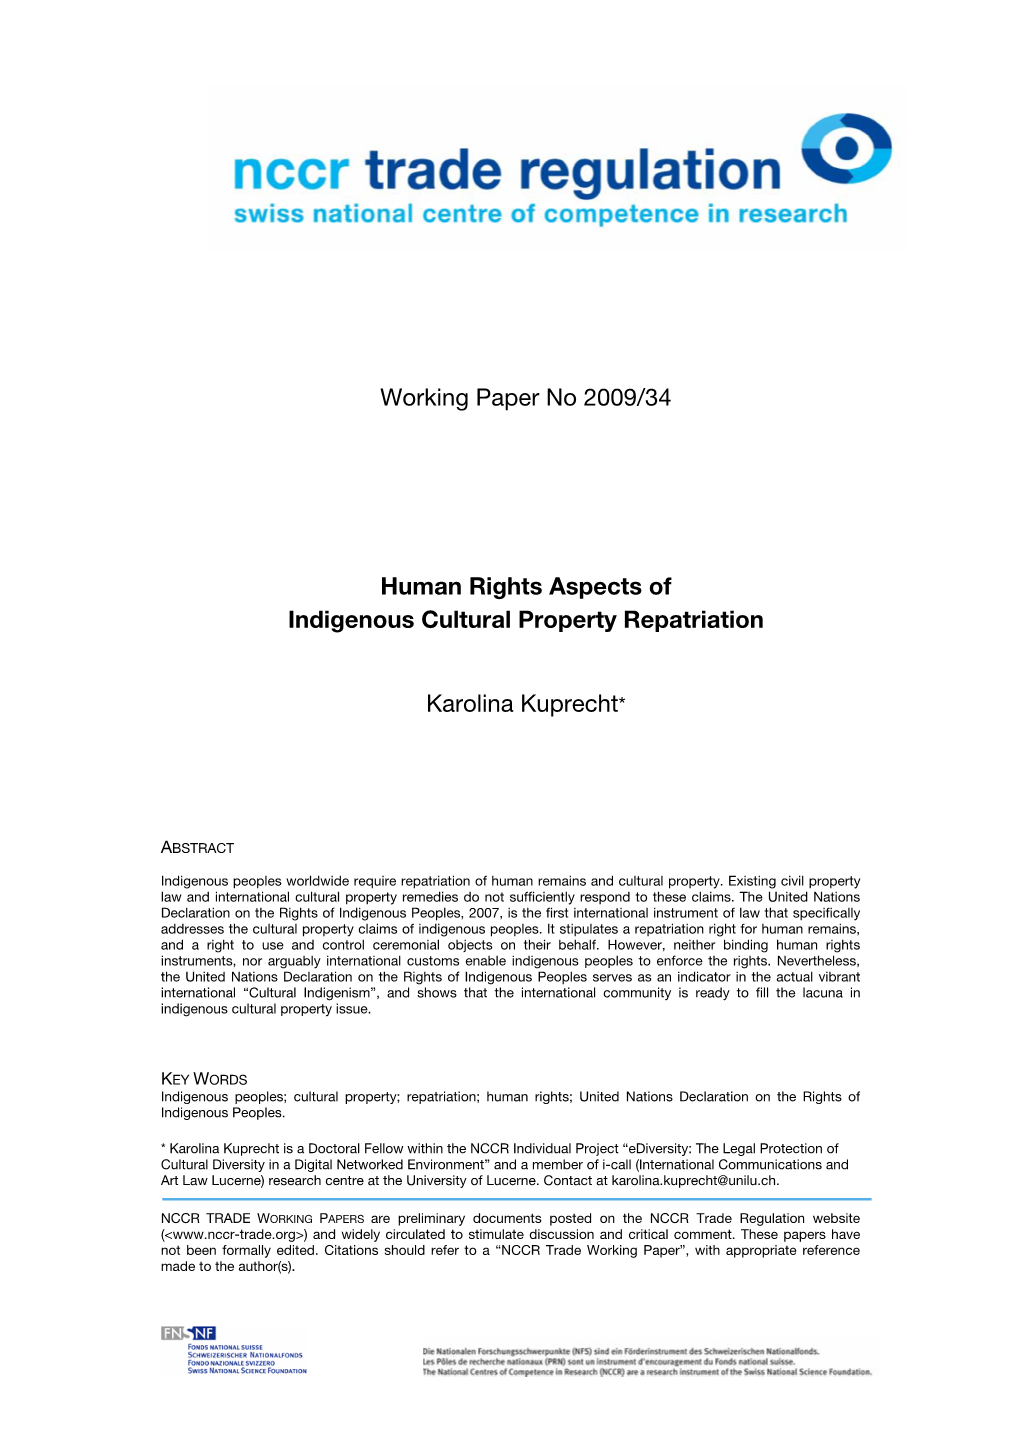 Working Paper No 2009/34 Human Rights Aspects of Indigenous